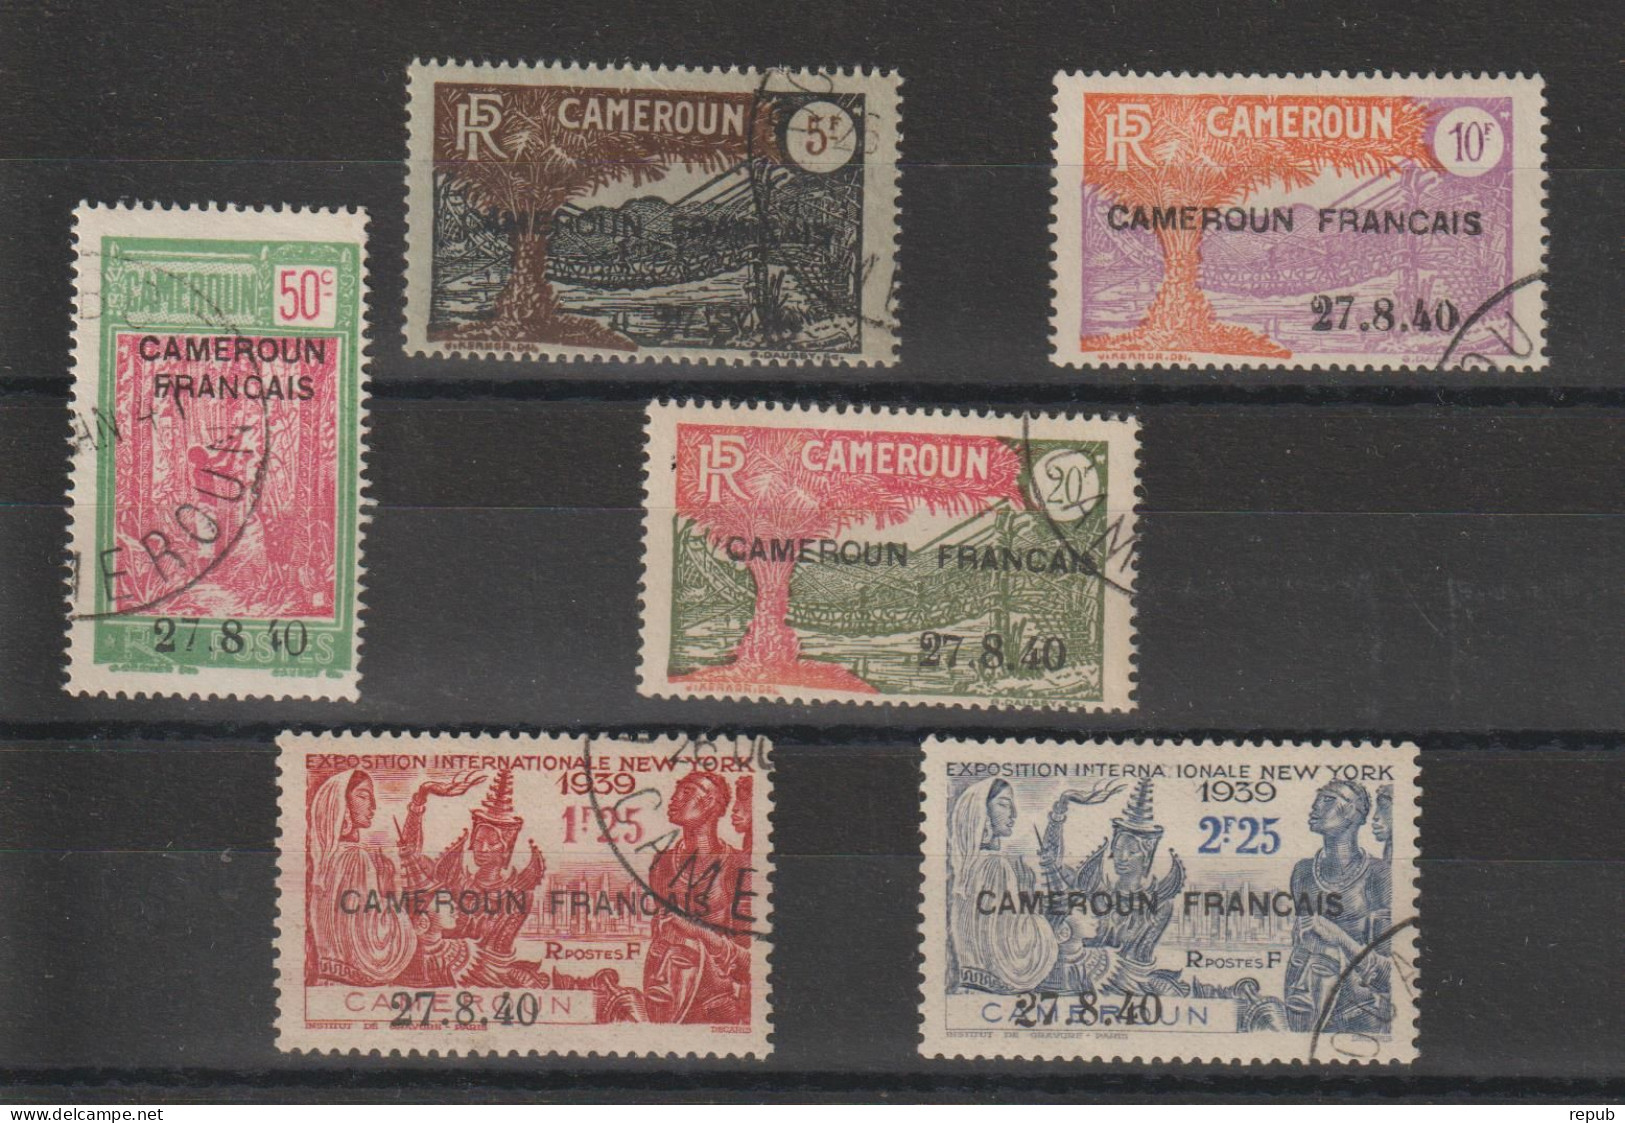 Cameroun 1940 Série Surchargée 27.8.40, 202-7, 6 Val Oblit Used - Used Stamps